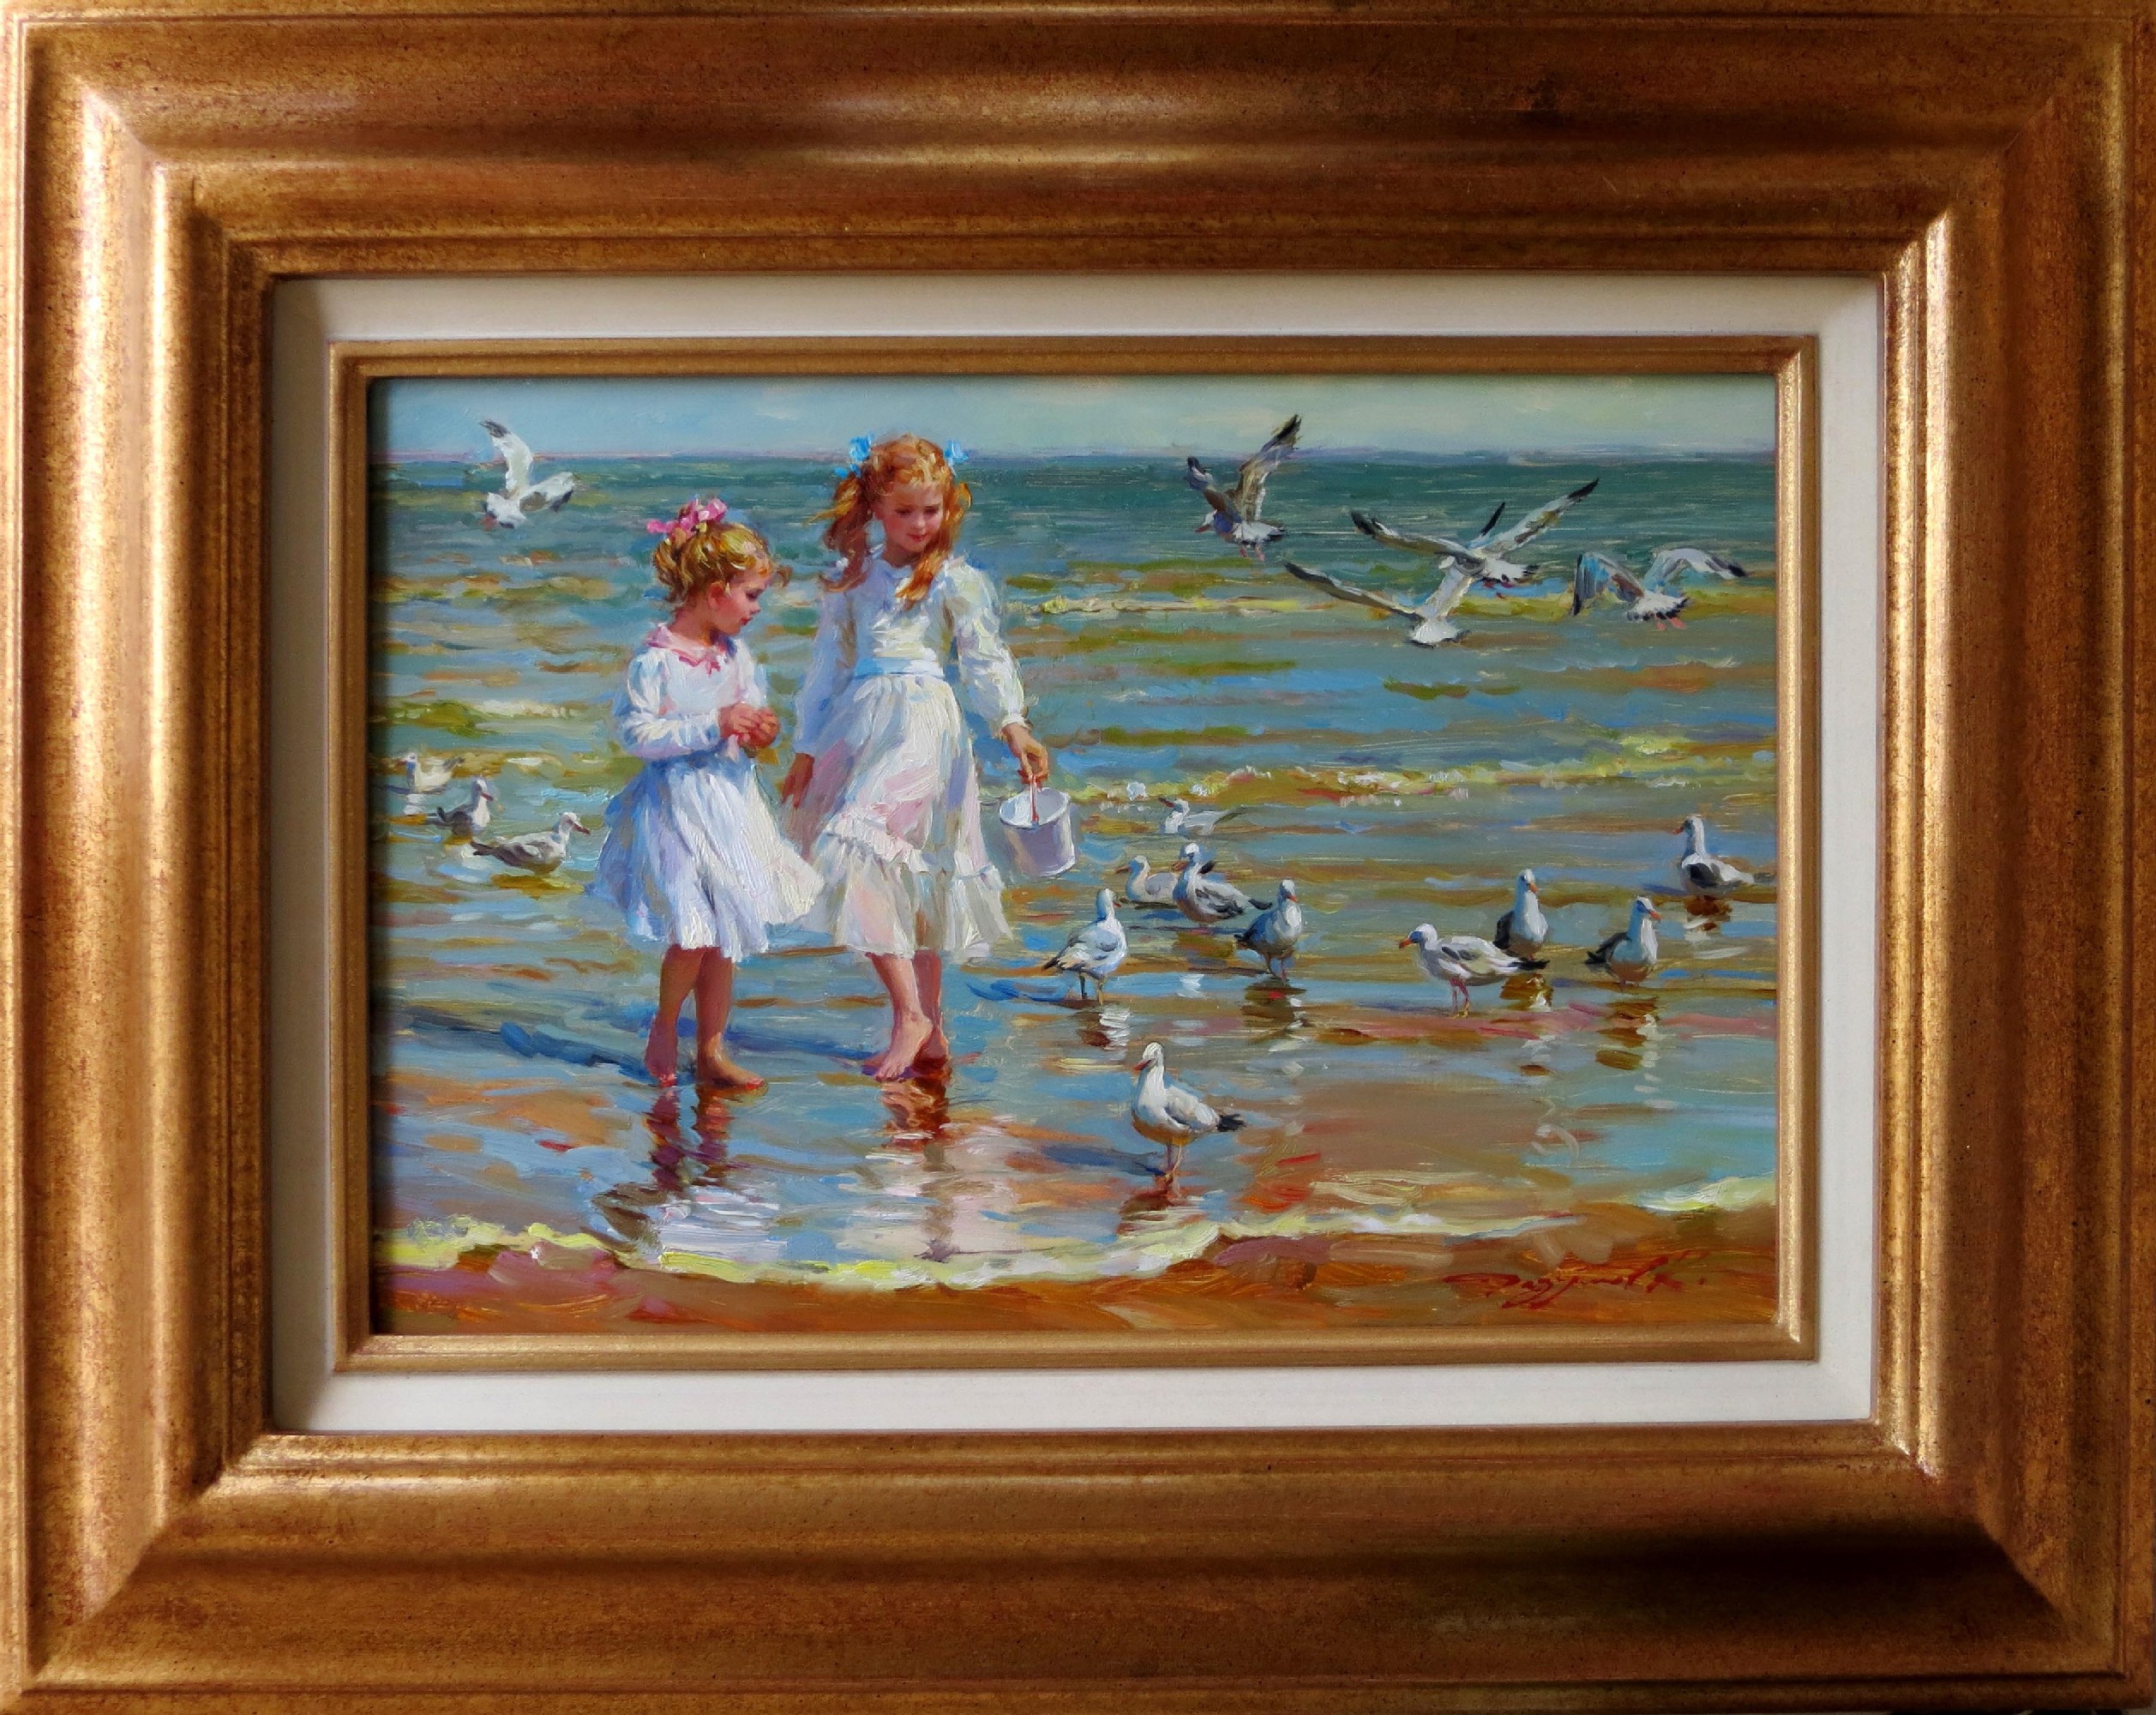 Konstantin Razumov (1974- ) Russian. "The Seagulls", Two Young Girls on a Beach, with Seagulls, - Image 4 of 5